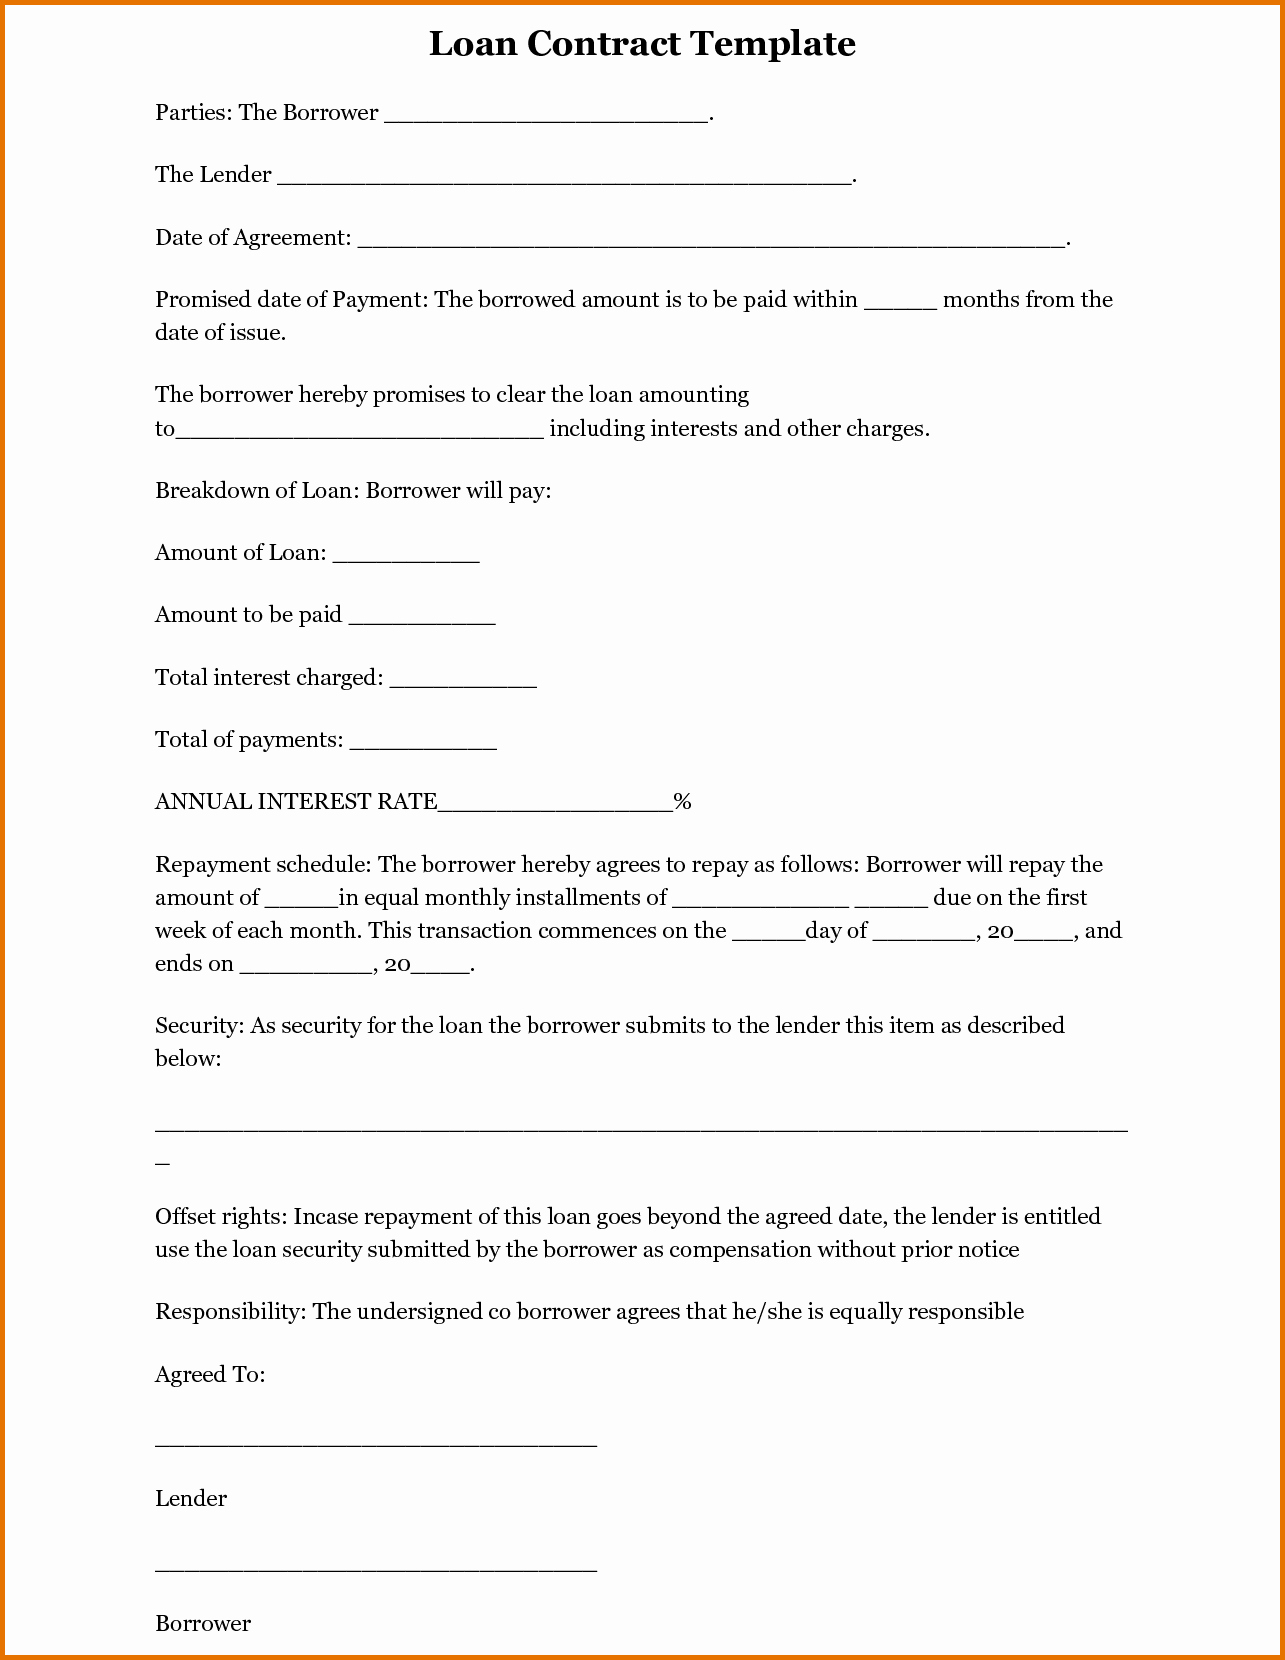 Personal Loan Contract Template Elegant Personal Loan Agreement Templatereference Letters Words